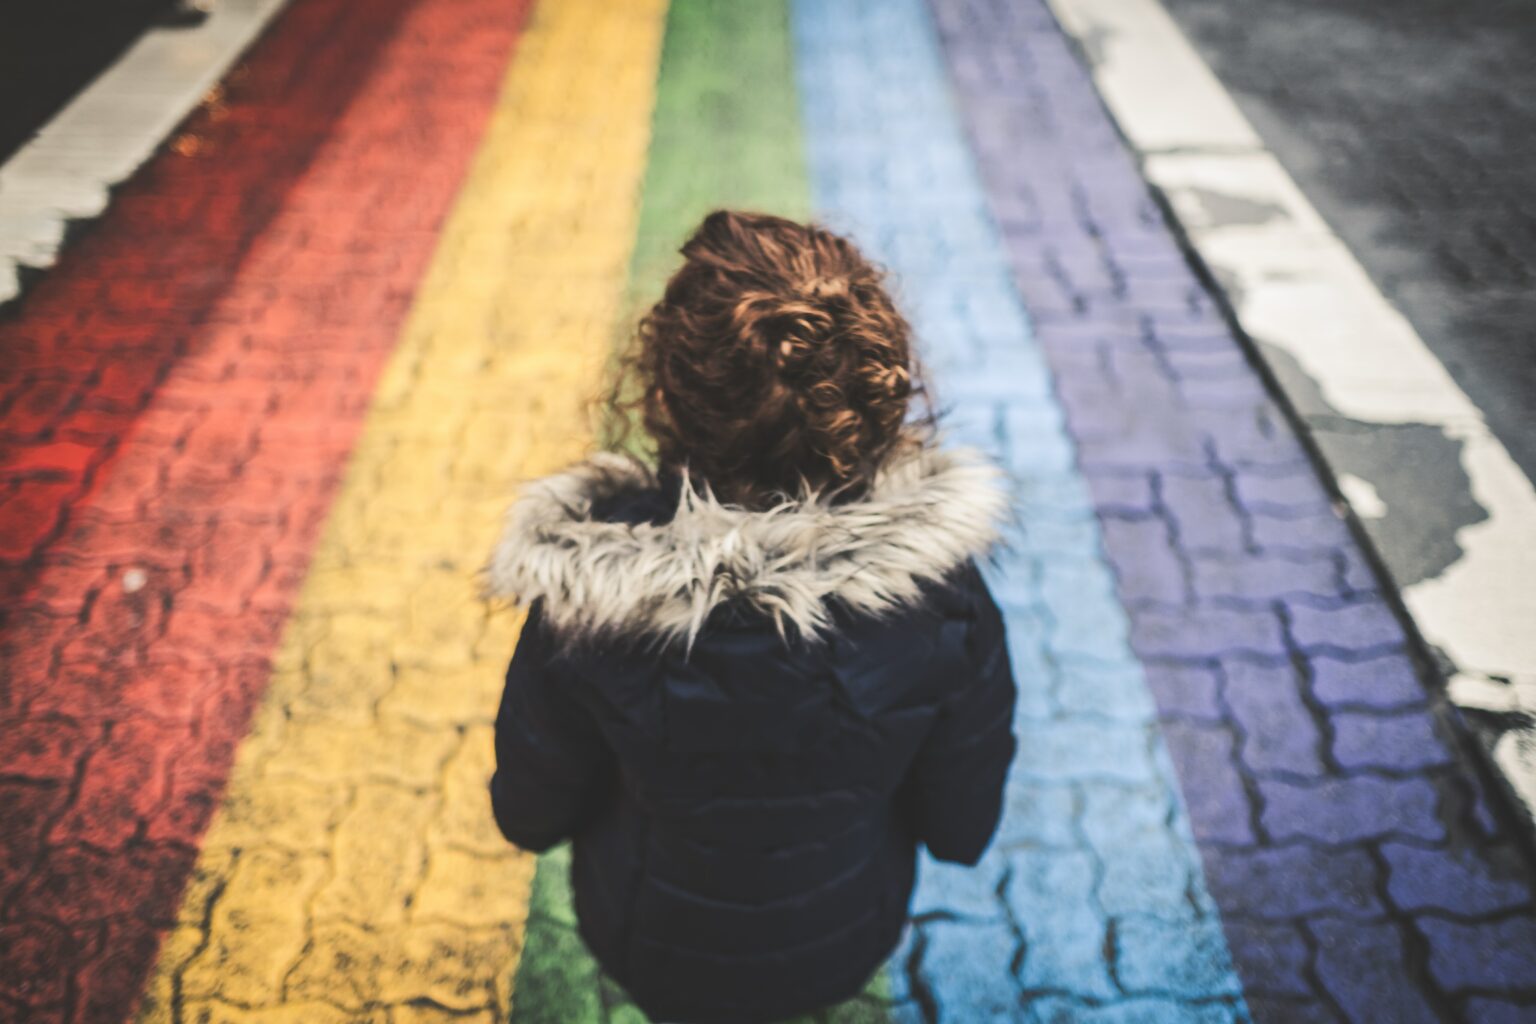 A child stands before a crossing in rainbow colors.